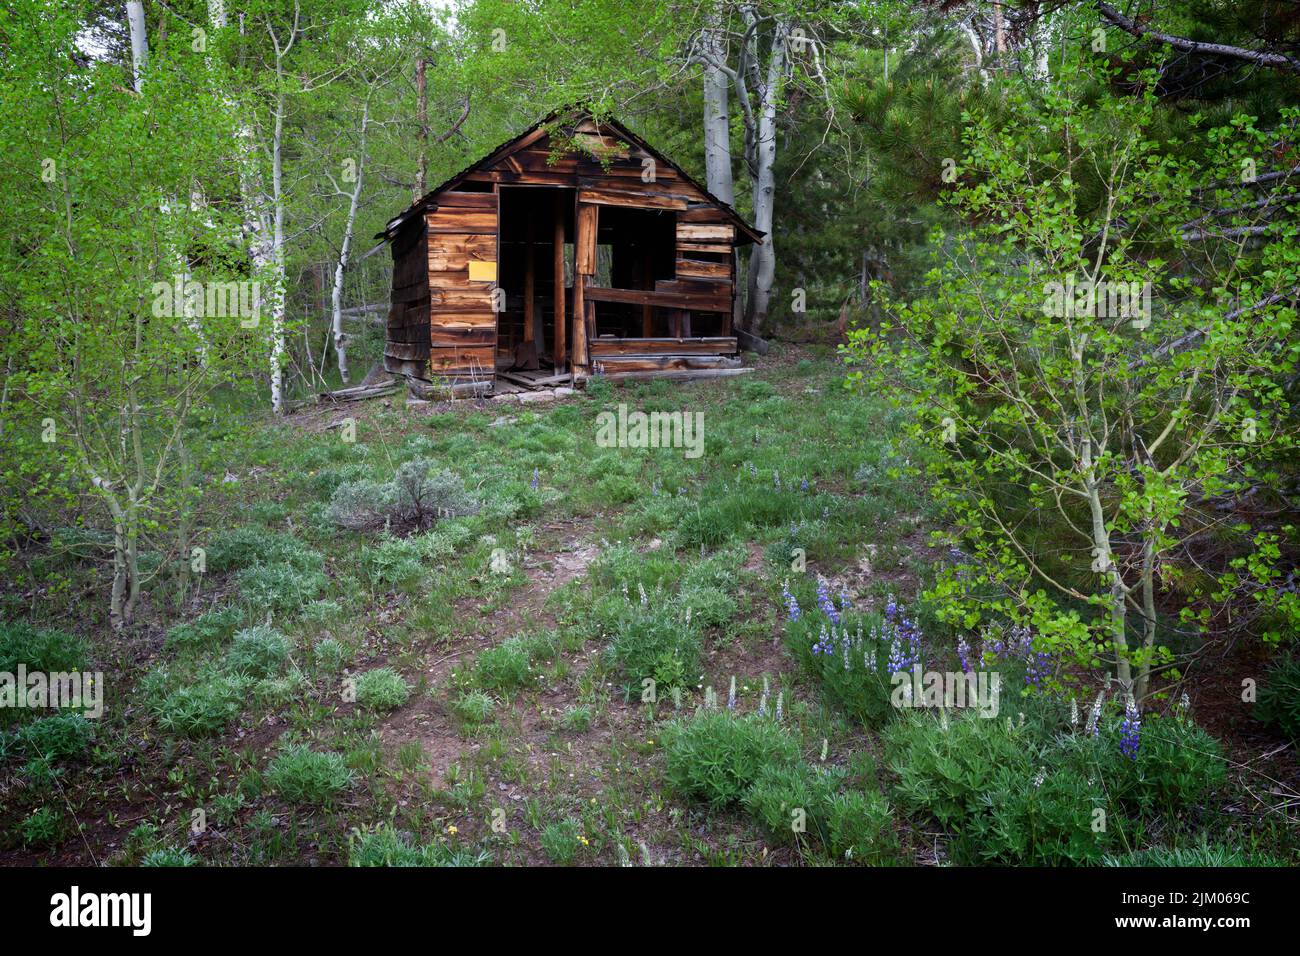 Cabin at the abandoned mining town of Miners Delight in Wyoming. Stock Photo